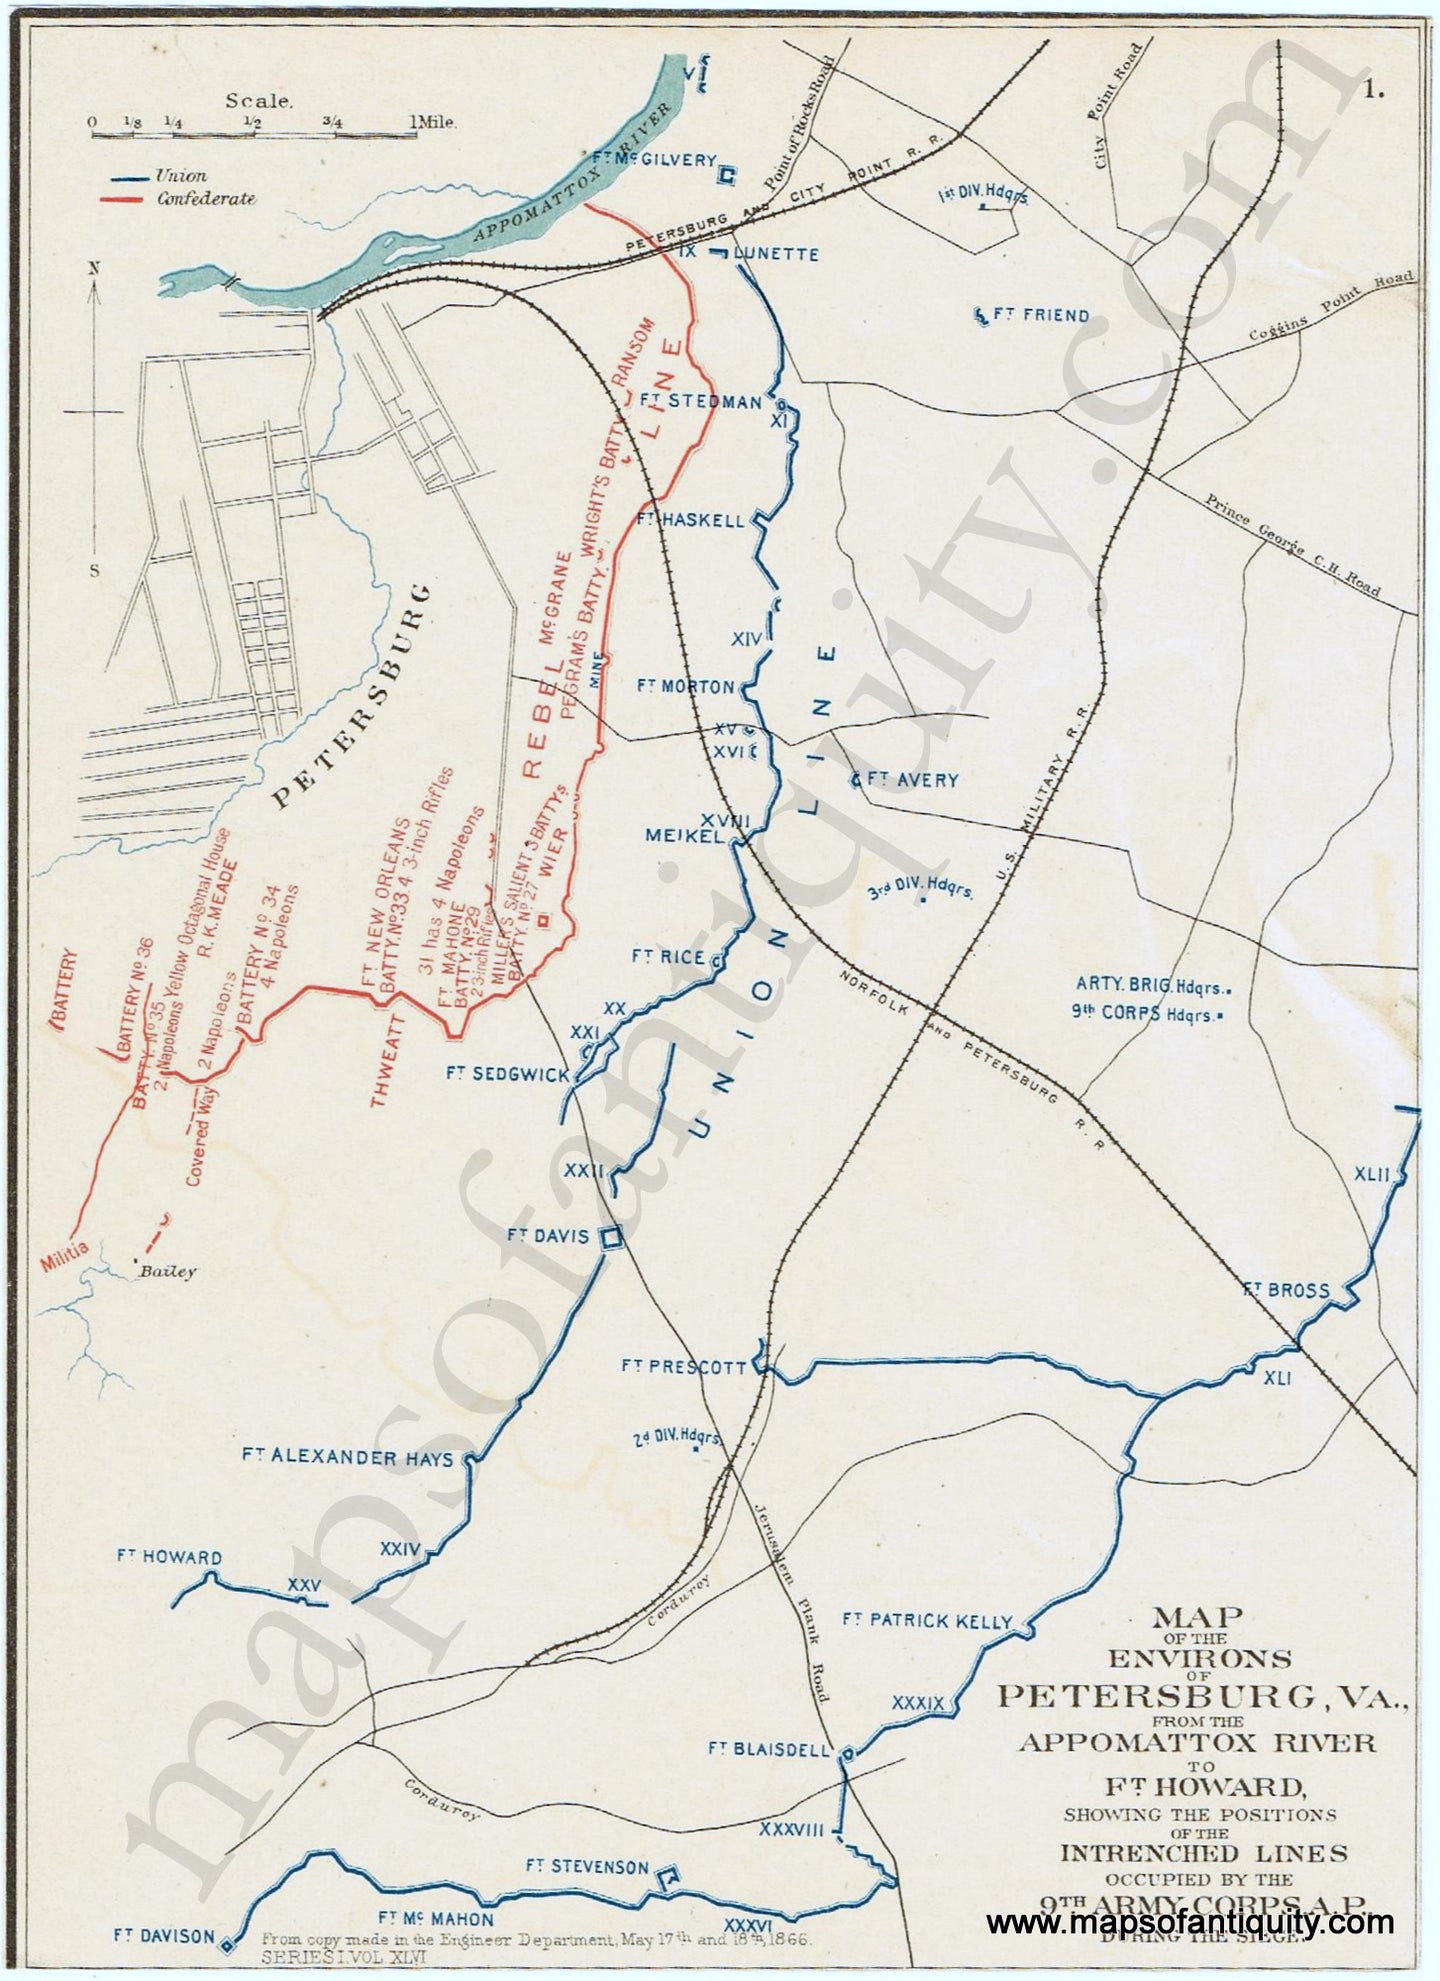 Antique-Printed-Color-Map-Map-of-the-Environs-of-Petersburg-VA.-from-the-Appomattox-River-to-Ft.-Howard-Showing-the-Positions-of-the-Intrenched-Lines-Occupied-by-the-9th-Army-Corps-A.P.-During-the-Siege.-******-United-States-Military-Maps-and-Views-Mid-Atlantic-Civil-War-1891-Bien-Maps-Of-Antiquity